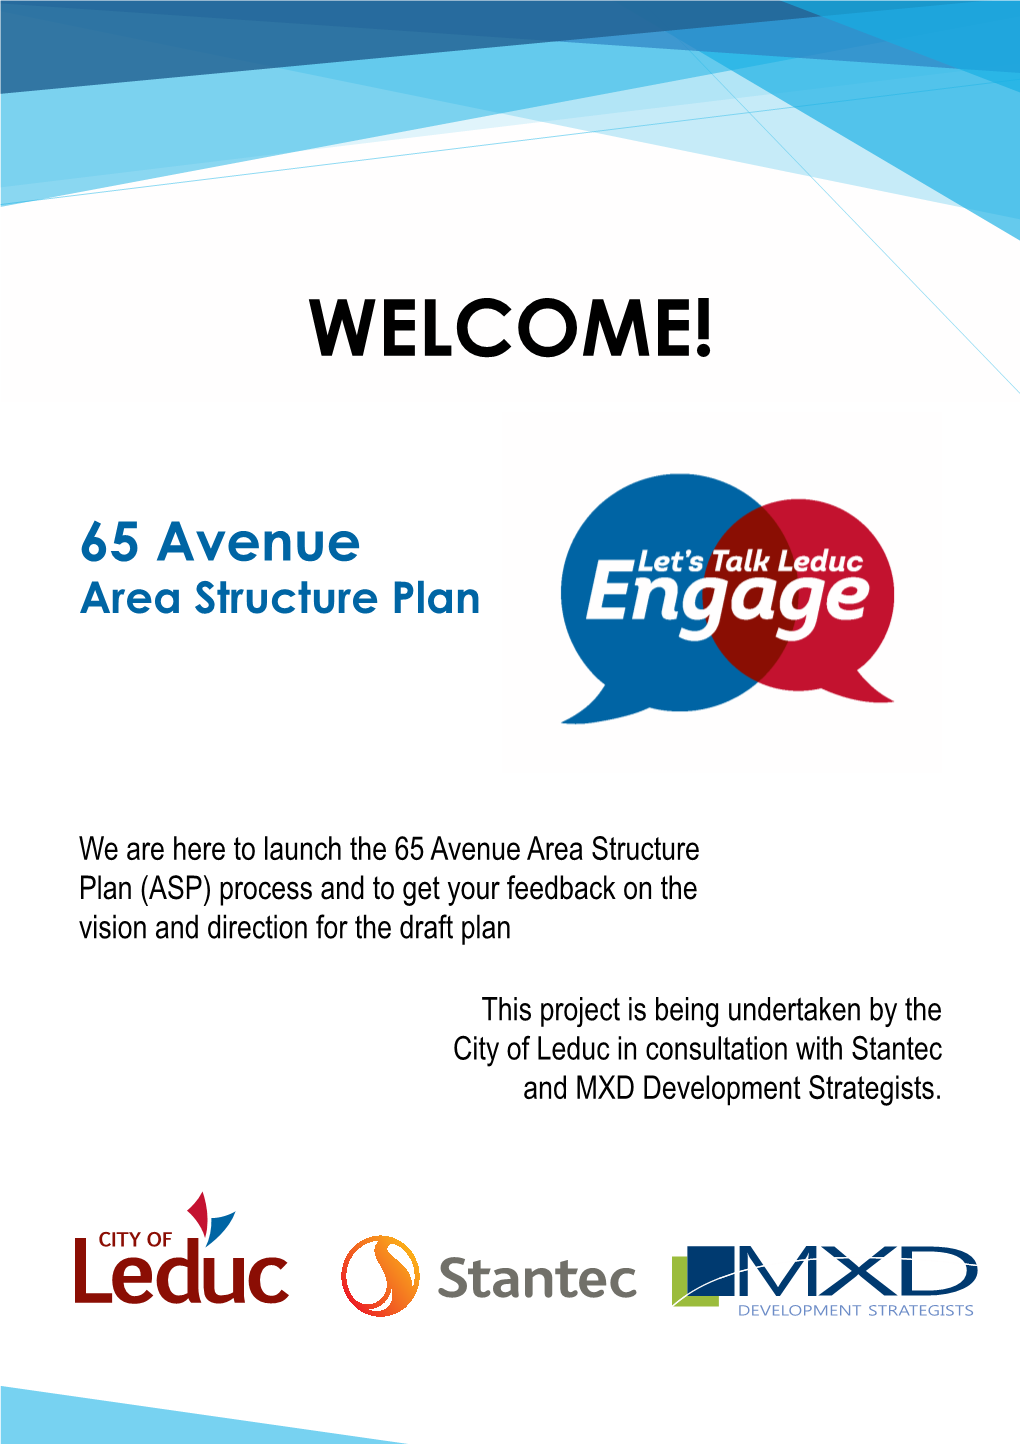 We Are Here to Launch the 65 Avenue Area Structure Plan (ASP) Process and to Get Your Feedback on the Vision and Direction for the Draft Plan